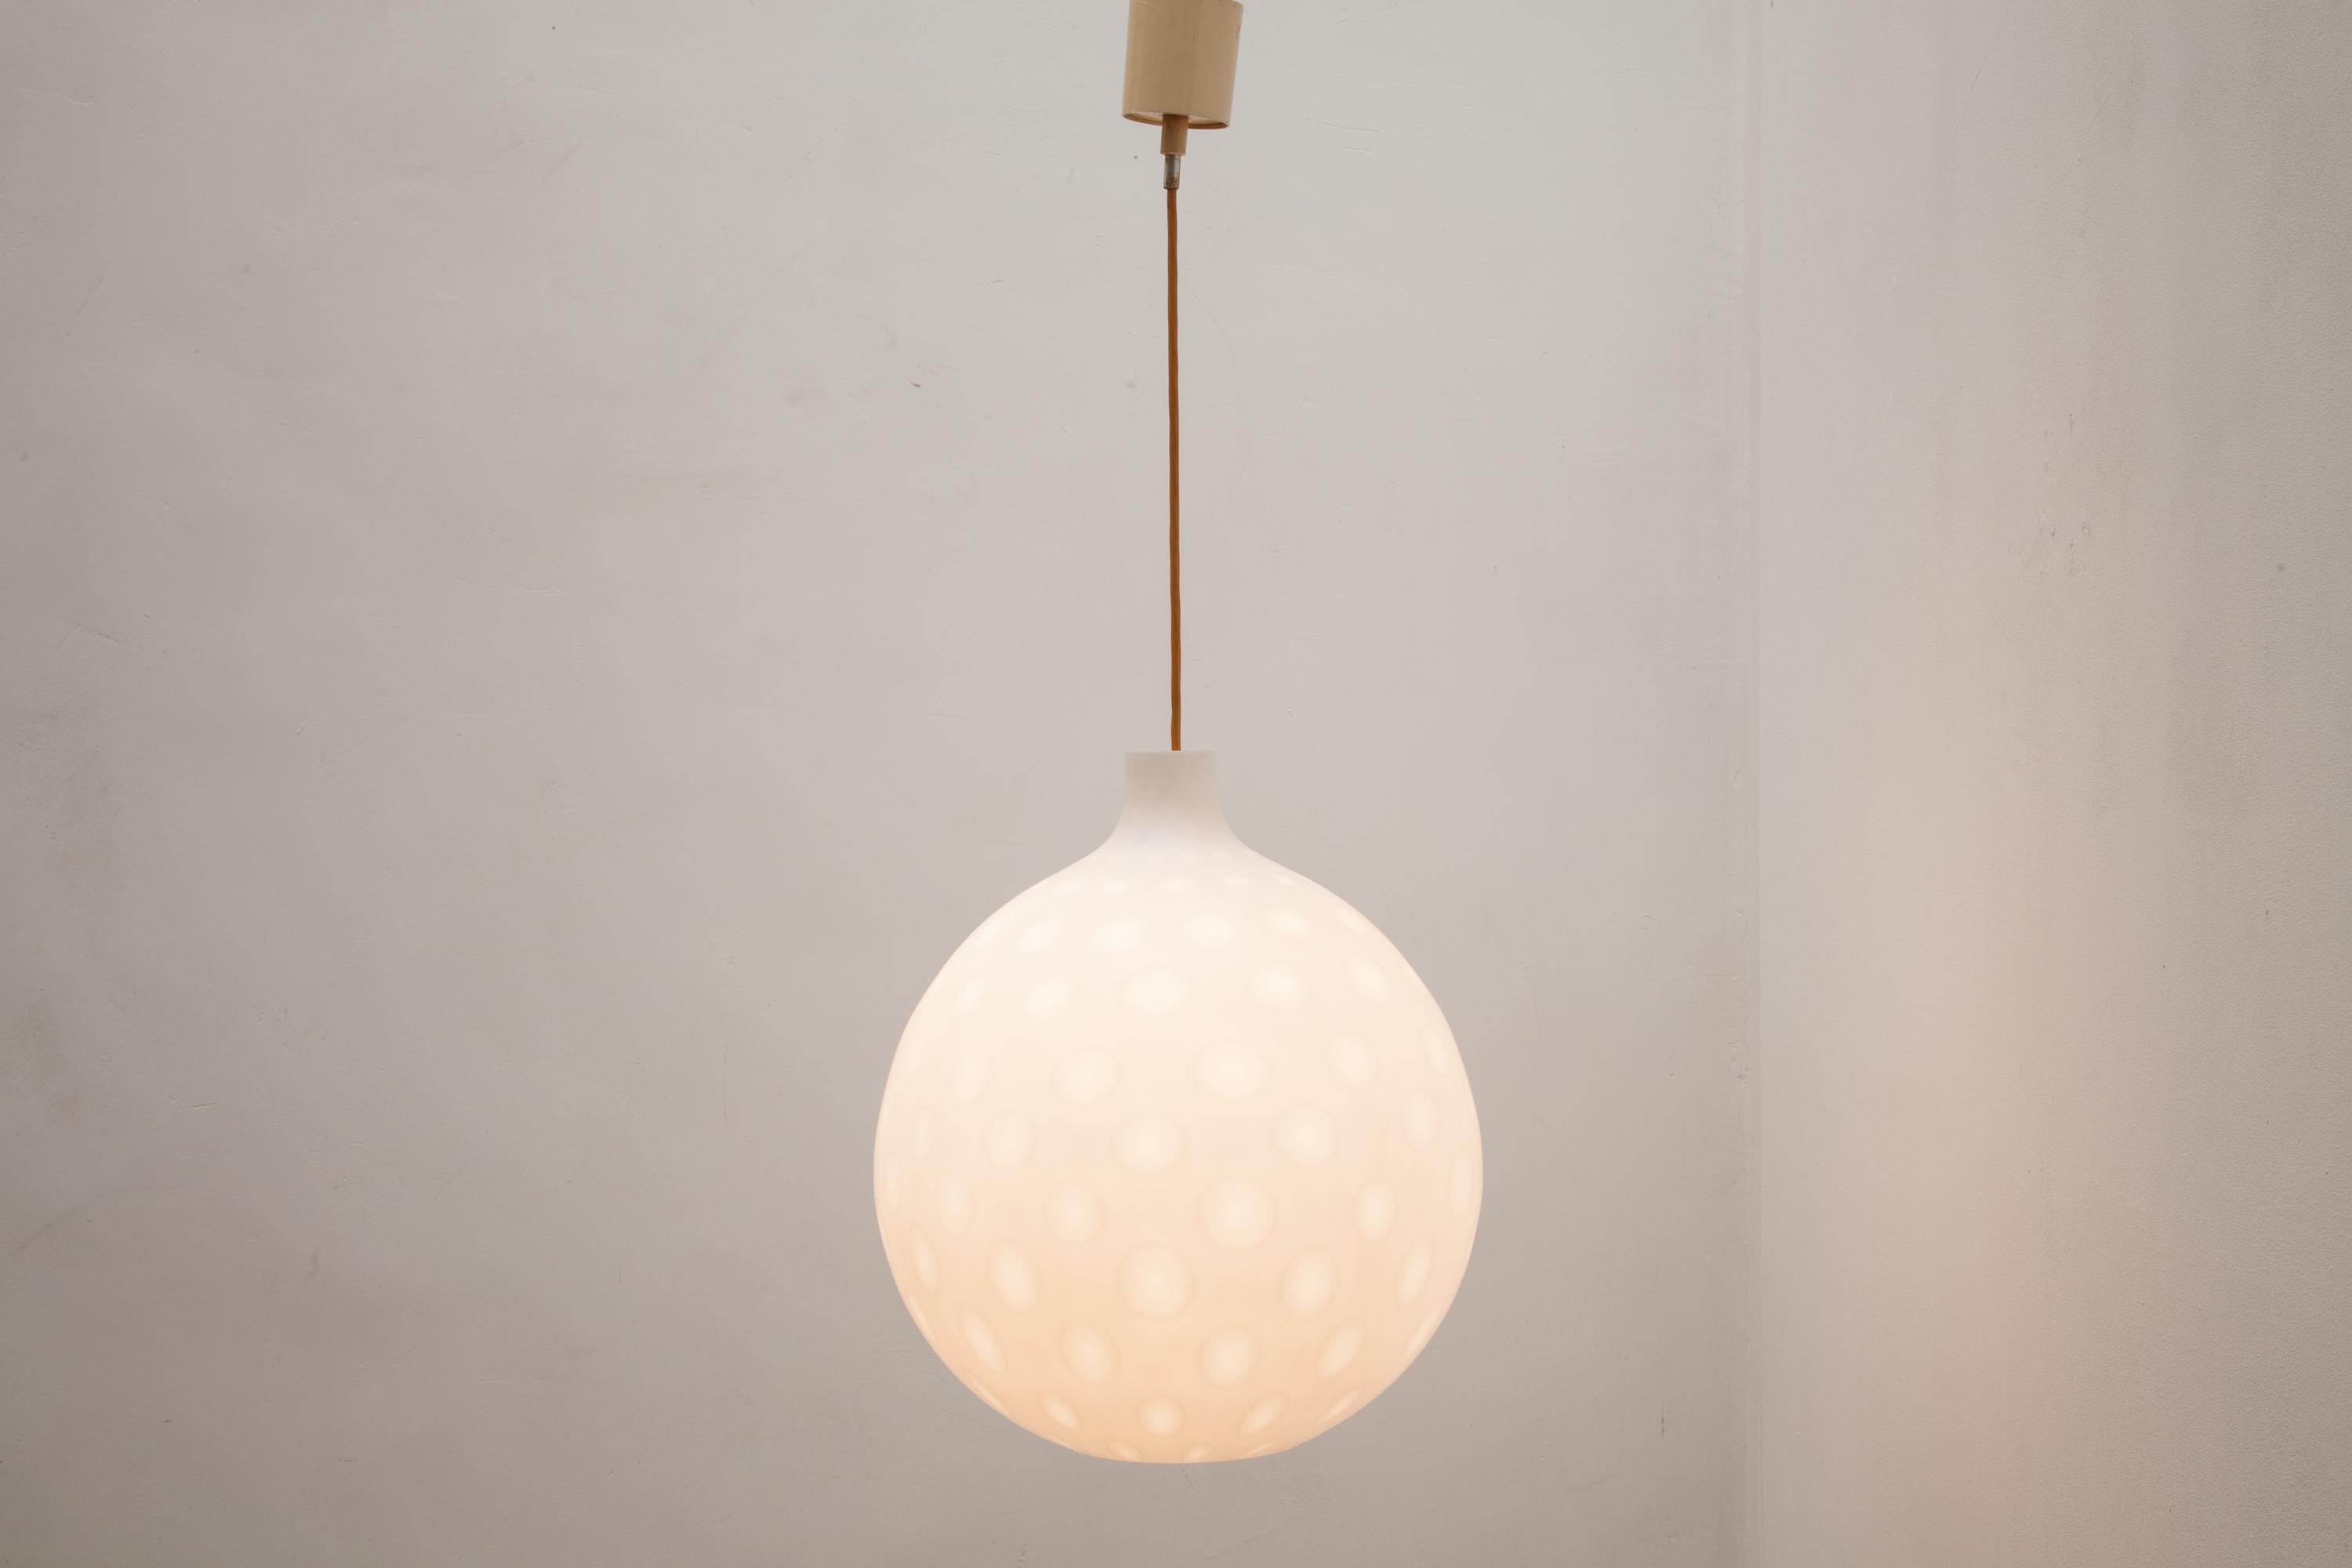 Midcentury glass globe pendant by Aloys Gangkofner for Peil & Putzler, 1958.
This model globe pendant features an organically shaped thick milk-white glass shade with a moon-like circular pattern in the glass. 

The fully functional piece is